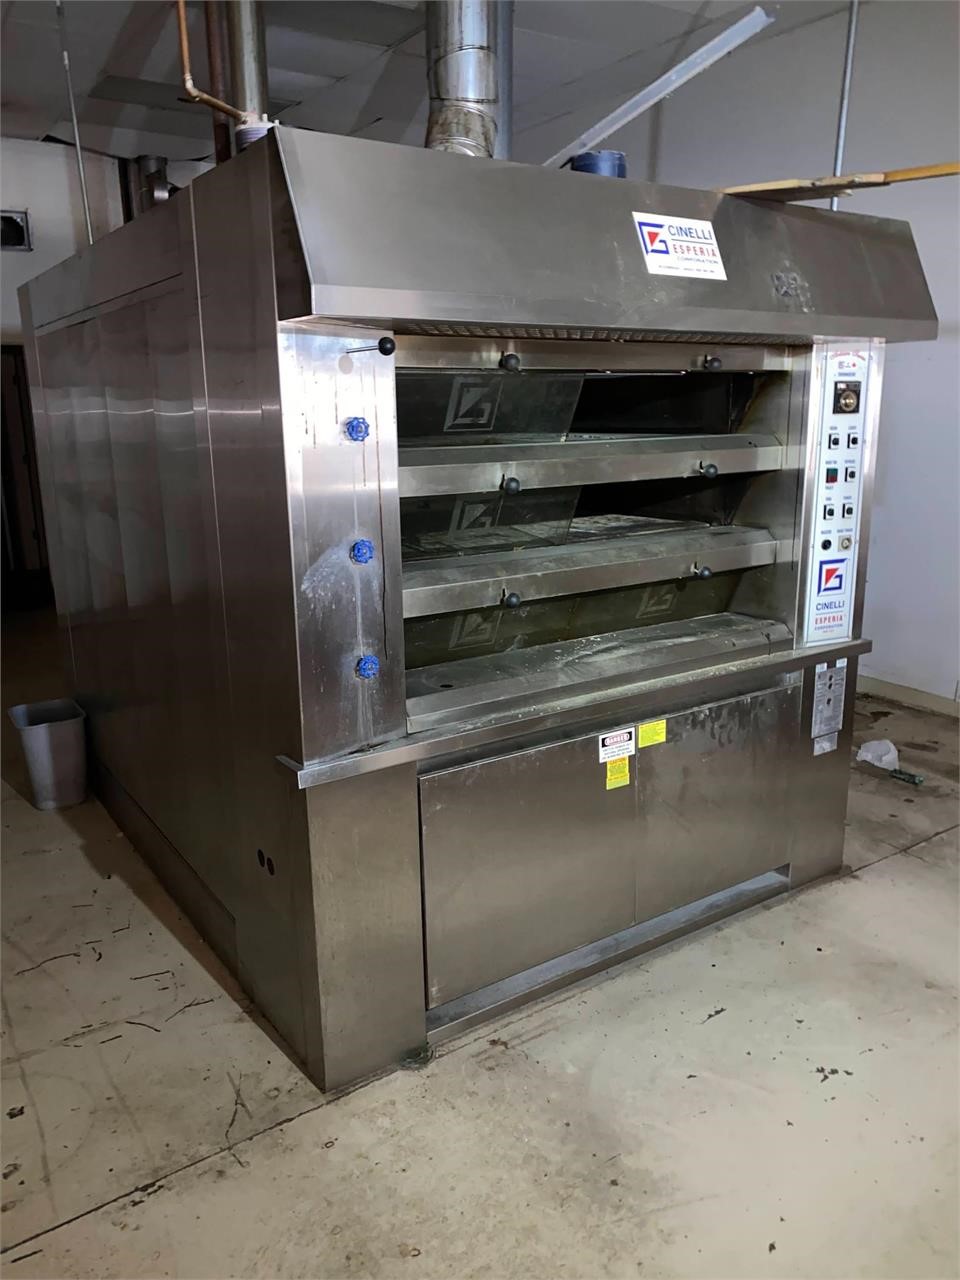 North Trade Cafe & Bakery Equipment